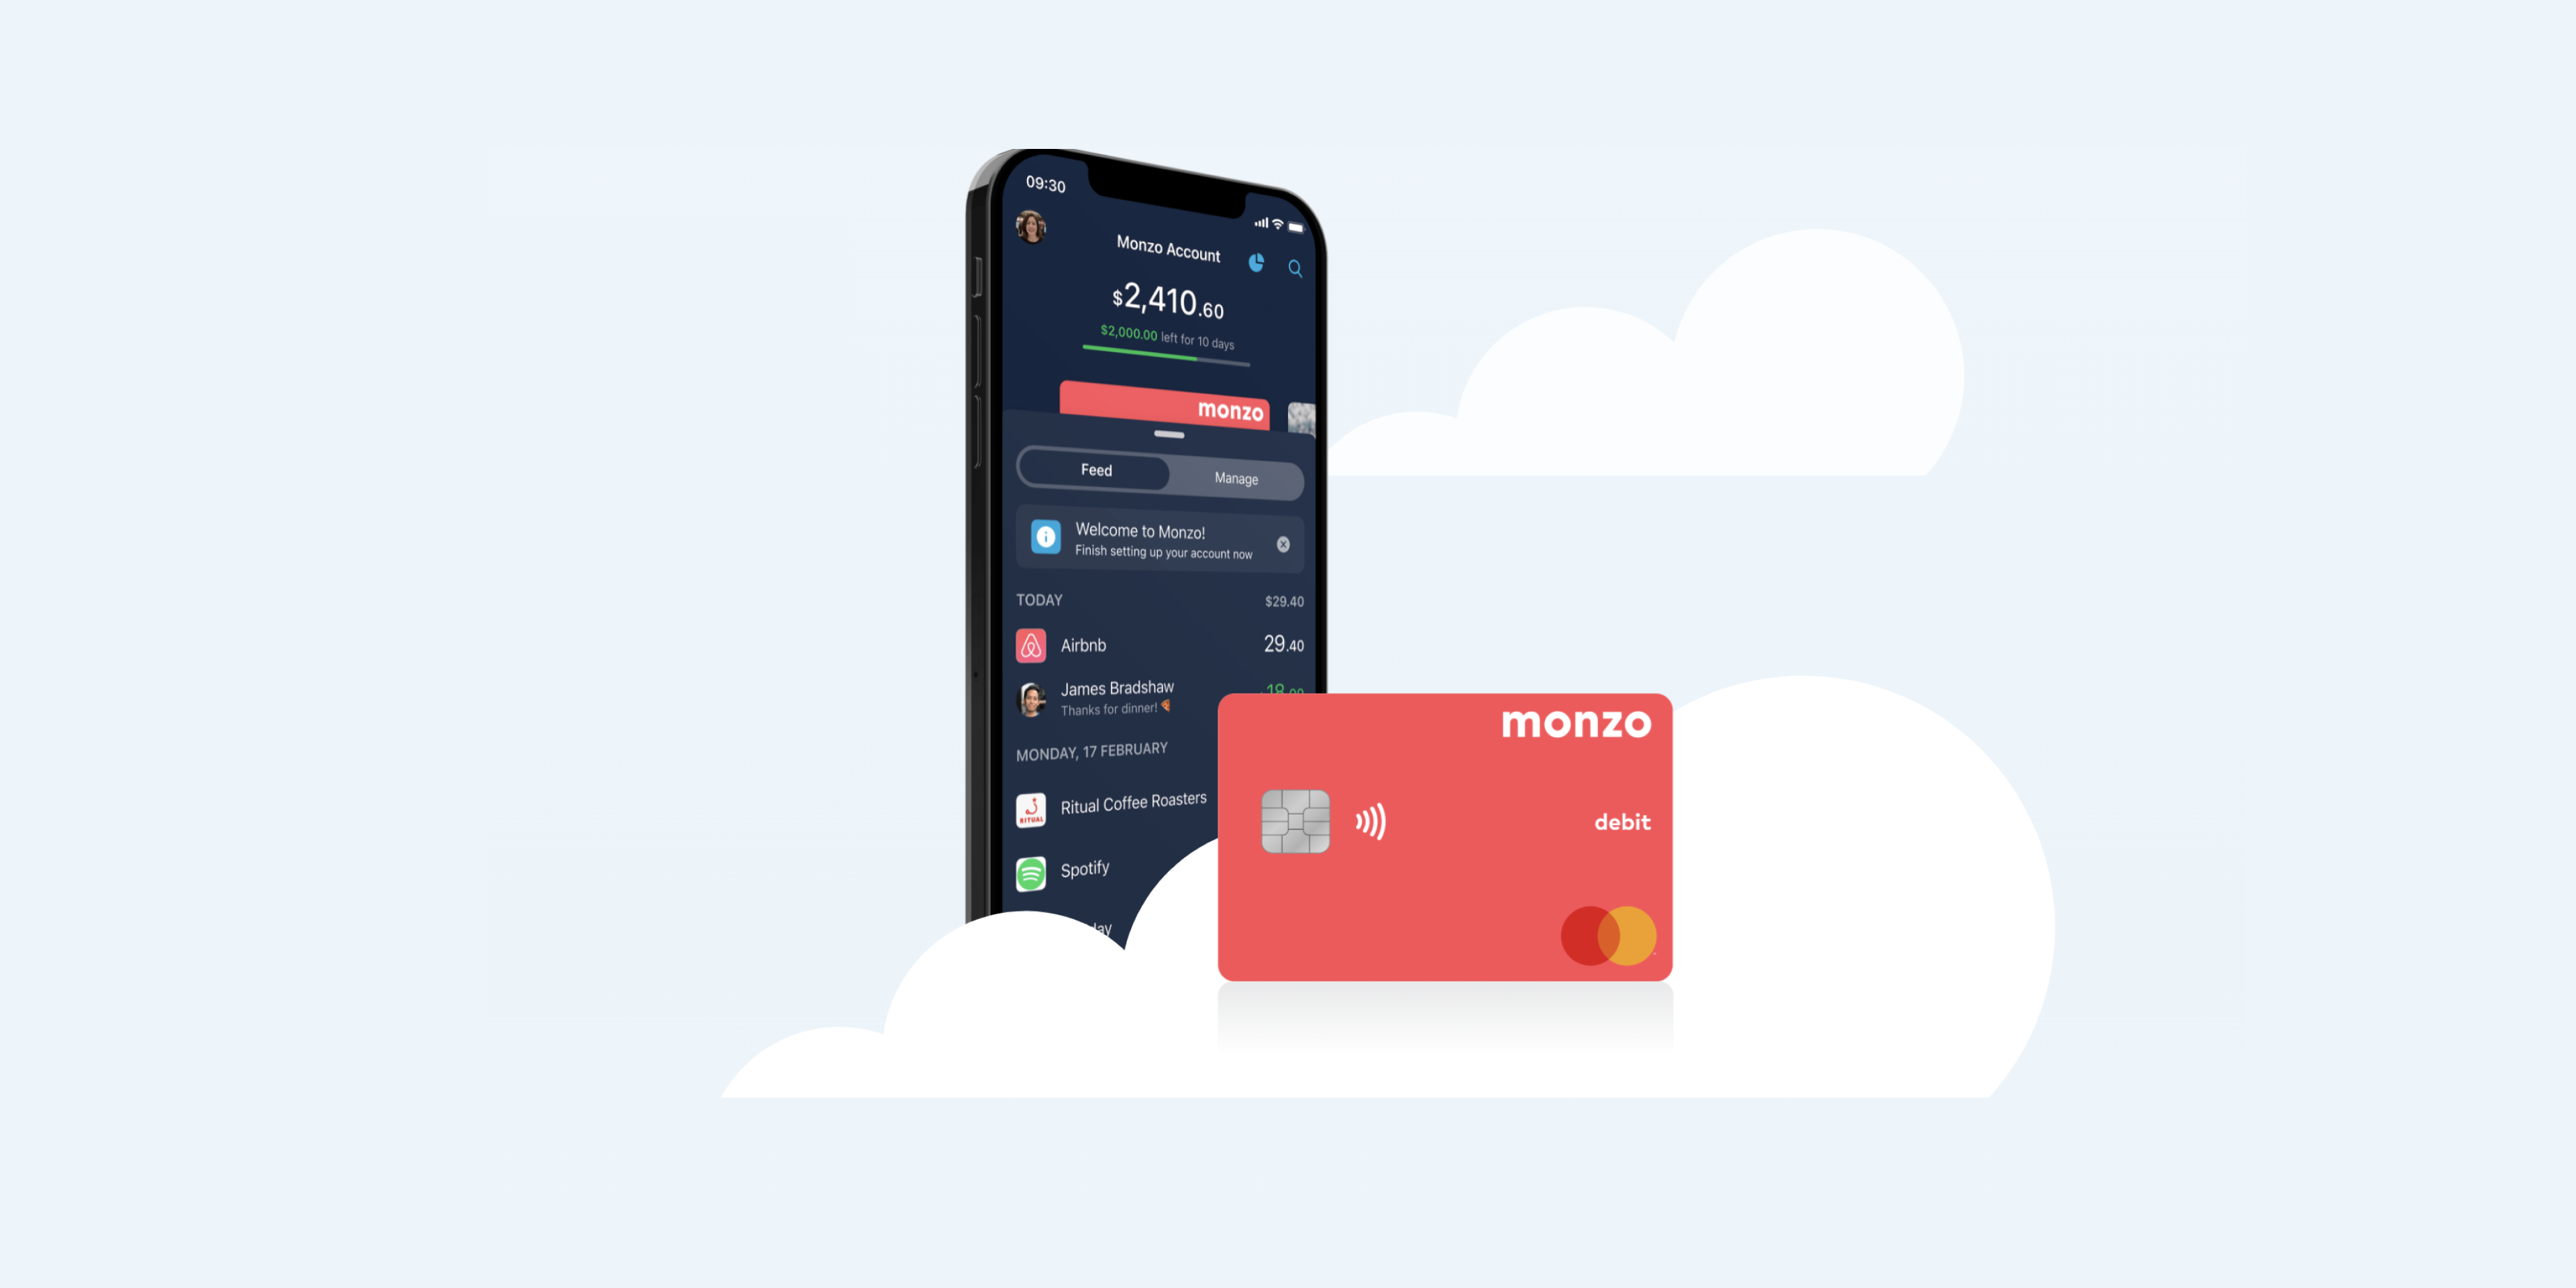 Illustration of Monzo card & mobile app floating in clouds